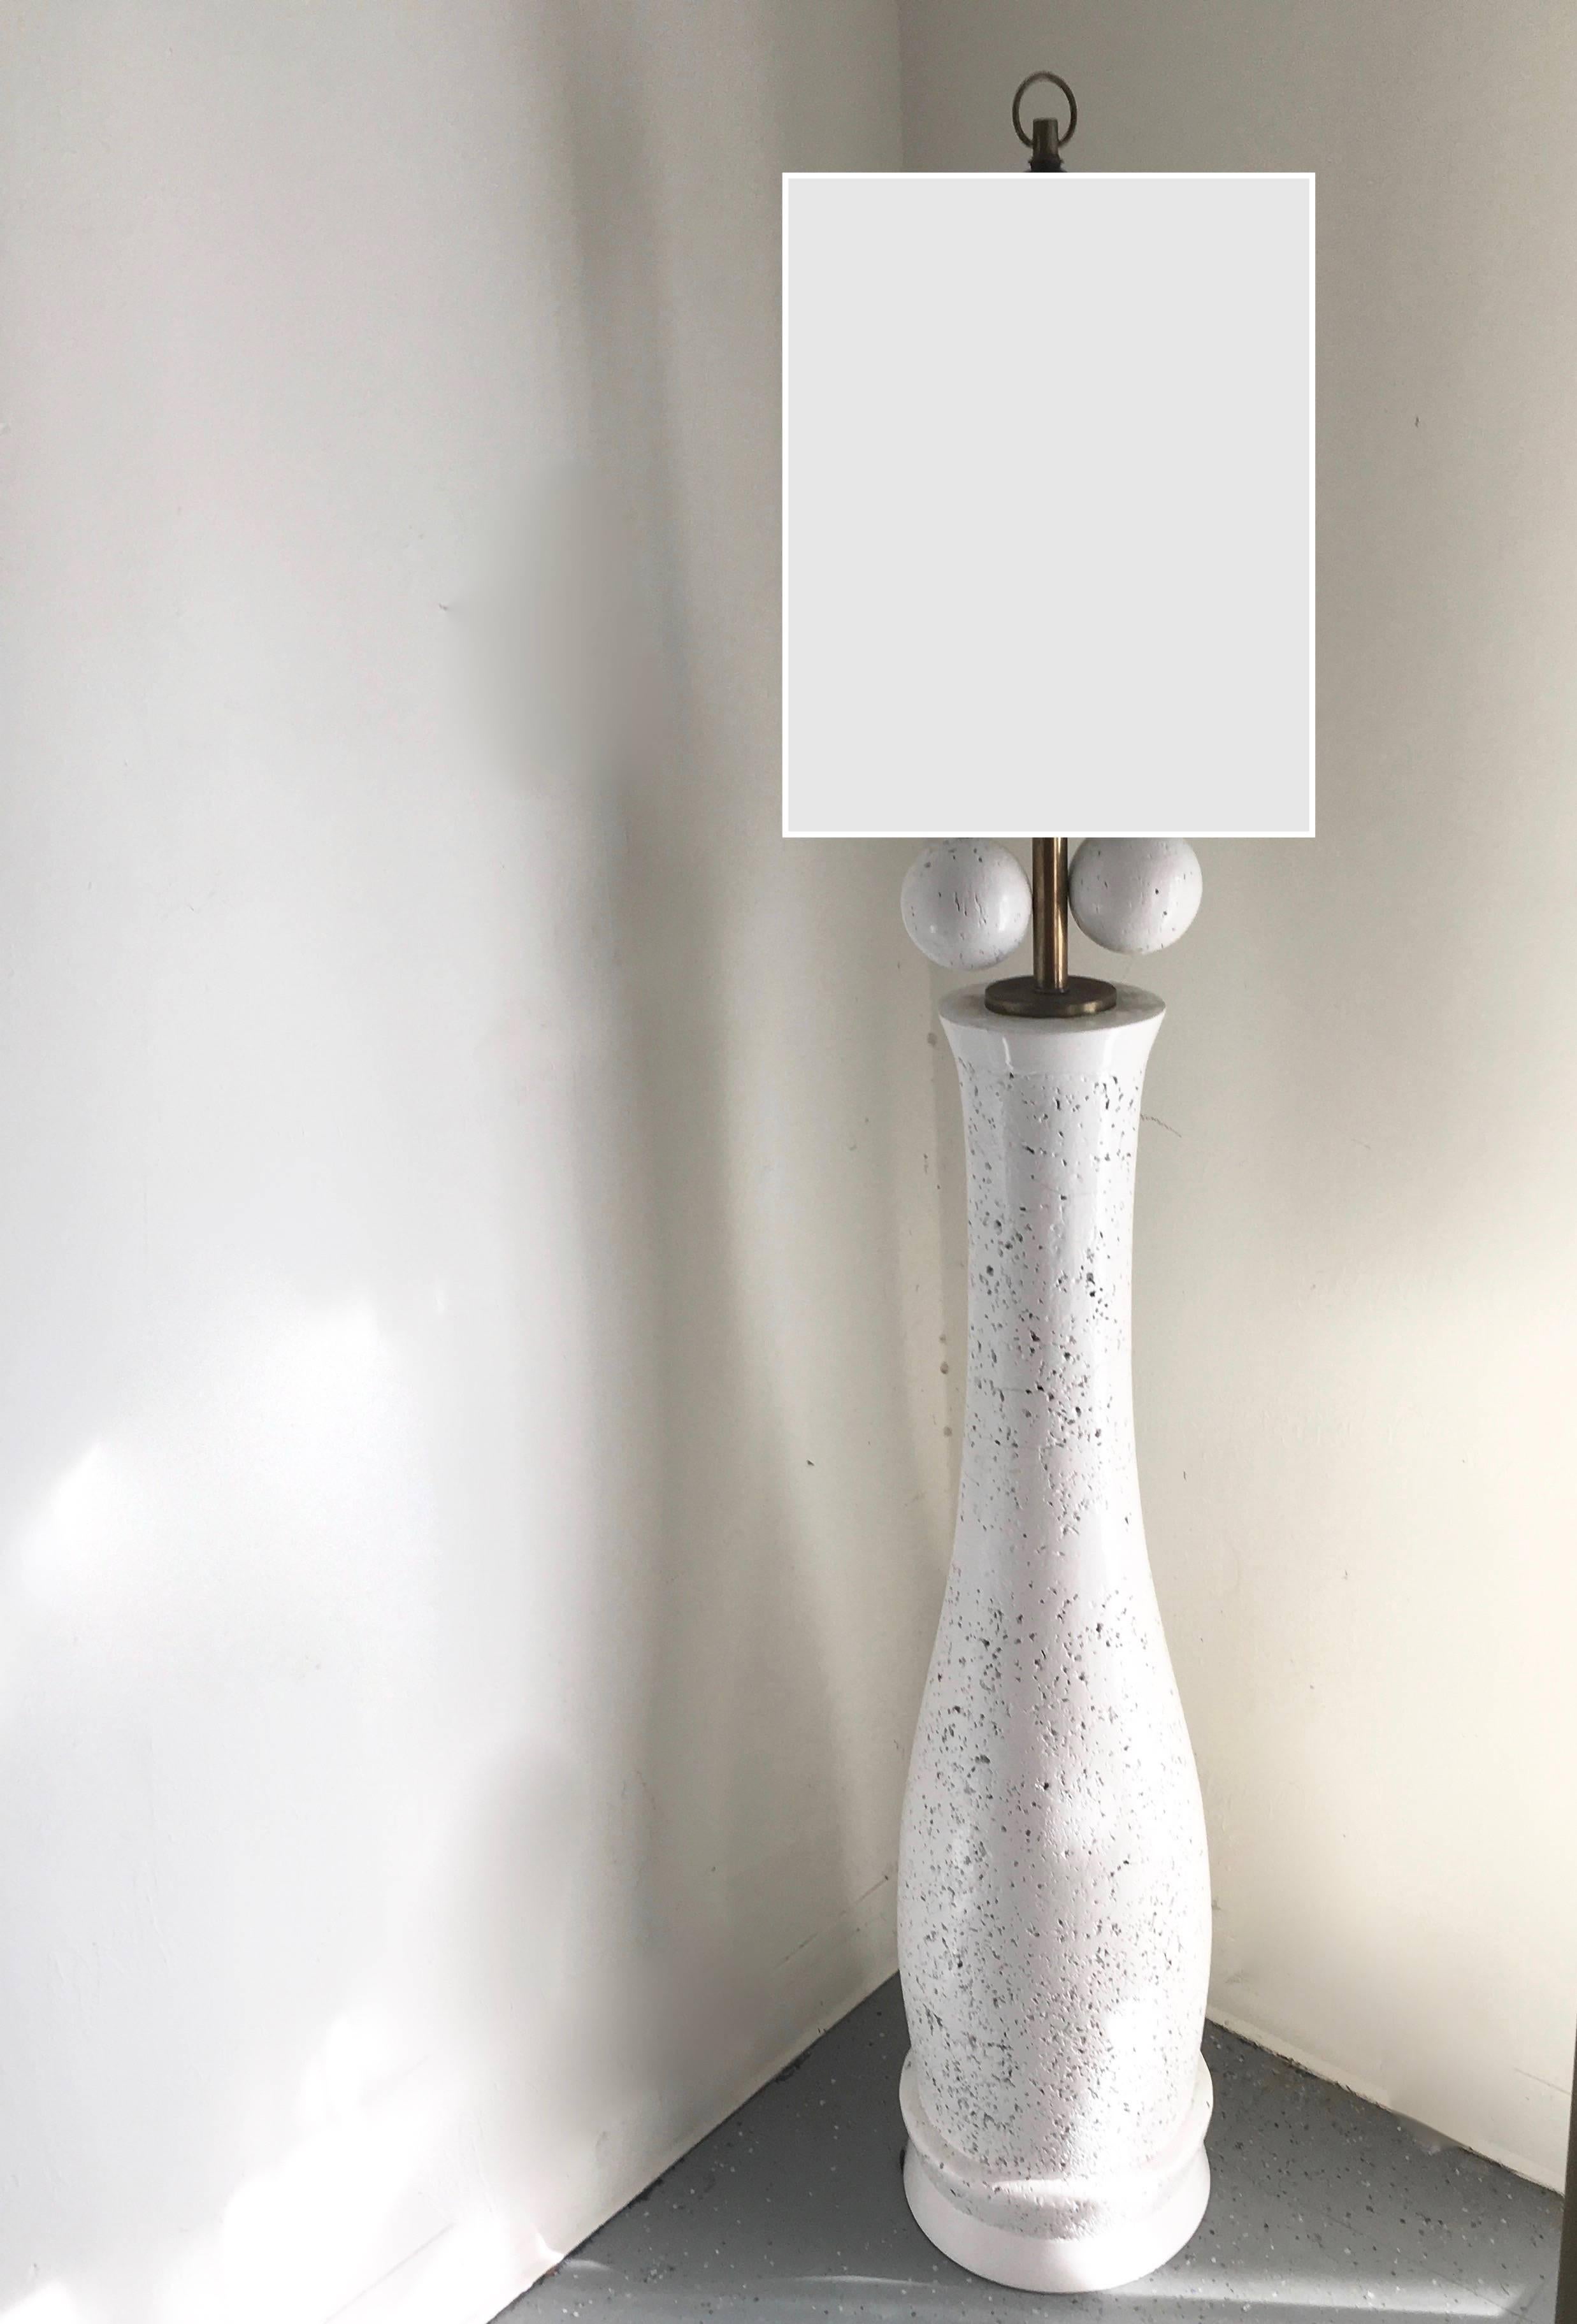 Milo Baughman floor lamp of lacquered cork, a very special lamp with terrific proportions and huge spheres for on/off pulls. While the lamp does not include a shade, we mocked one up in black and white.

For an additional fee we can make a custom